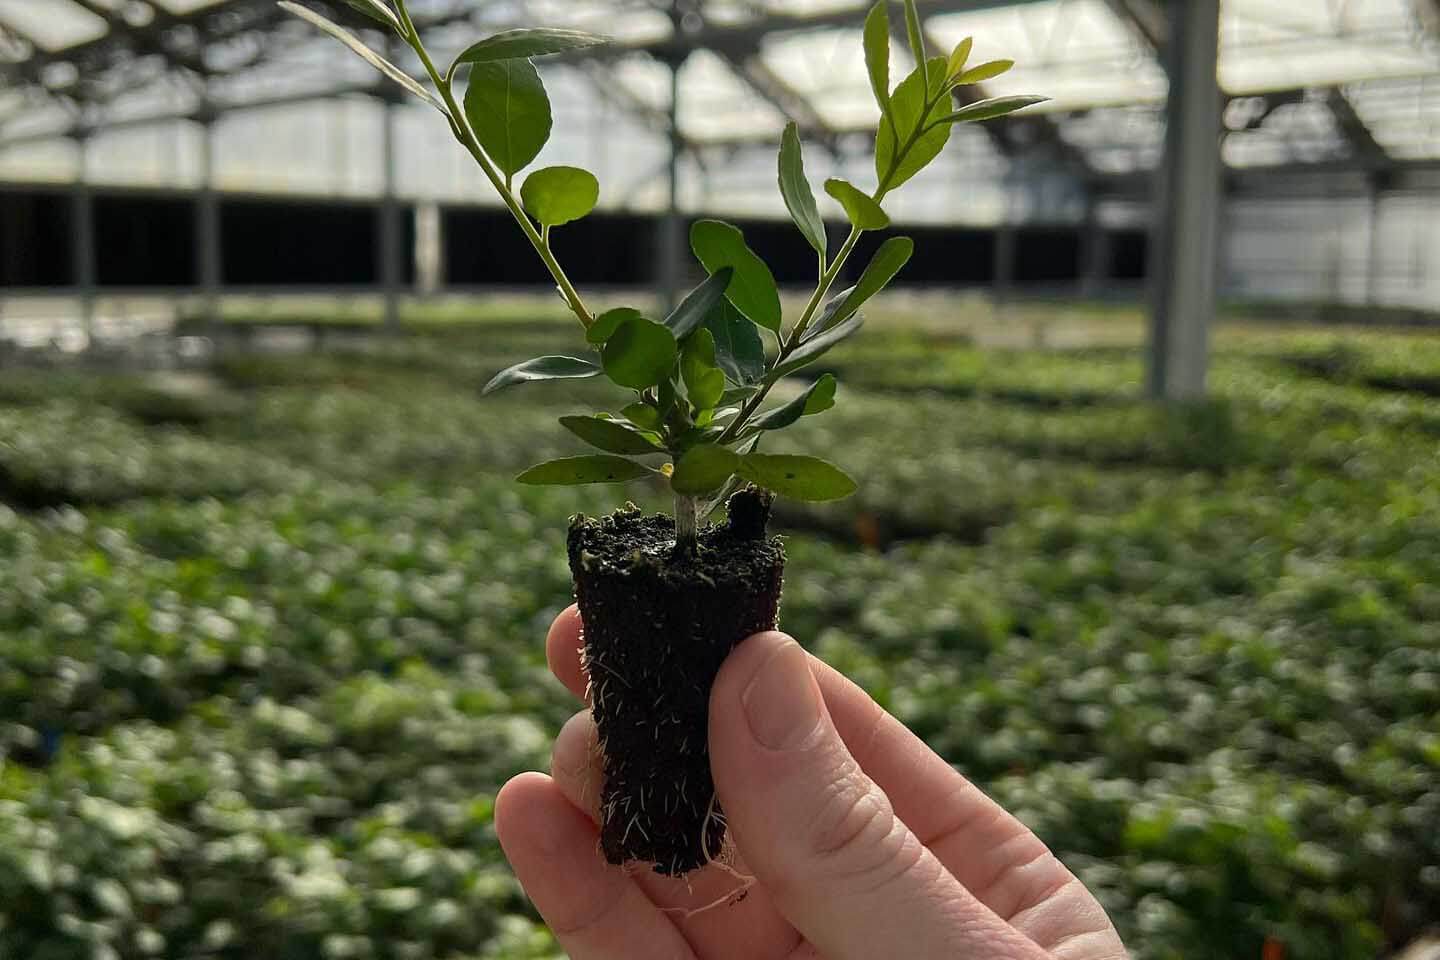 Florida Grown Business Yaupon Brothers tea plant in the greenhouse.